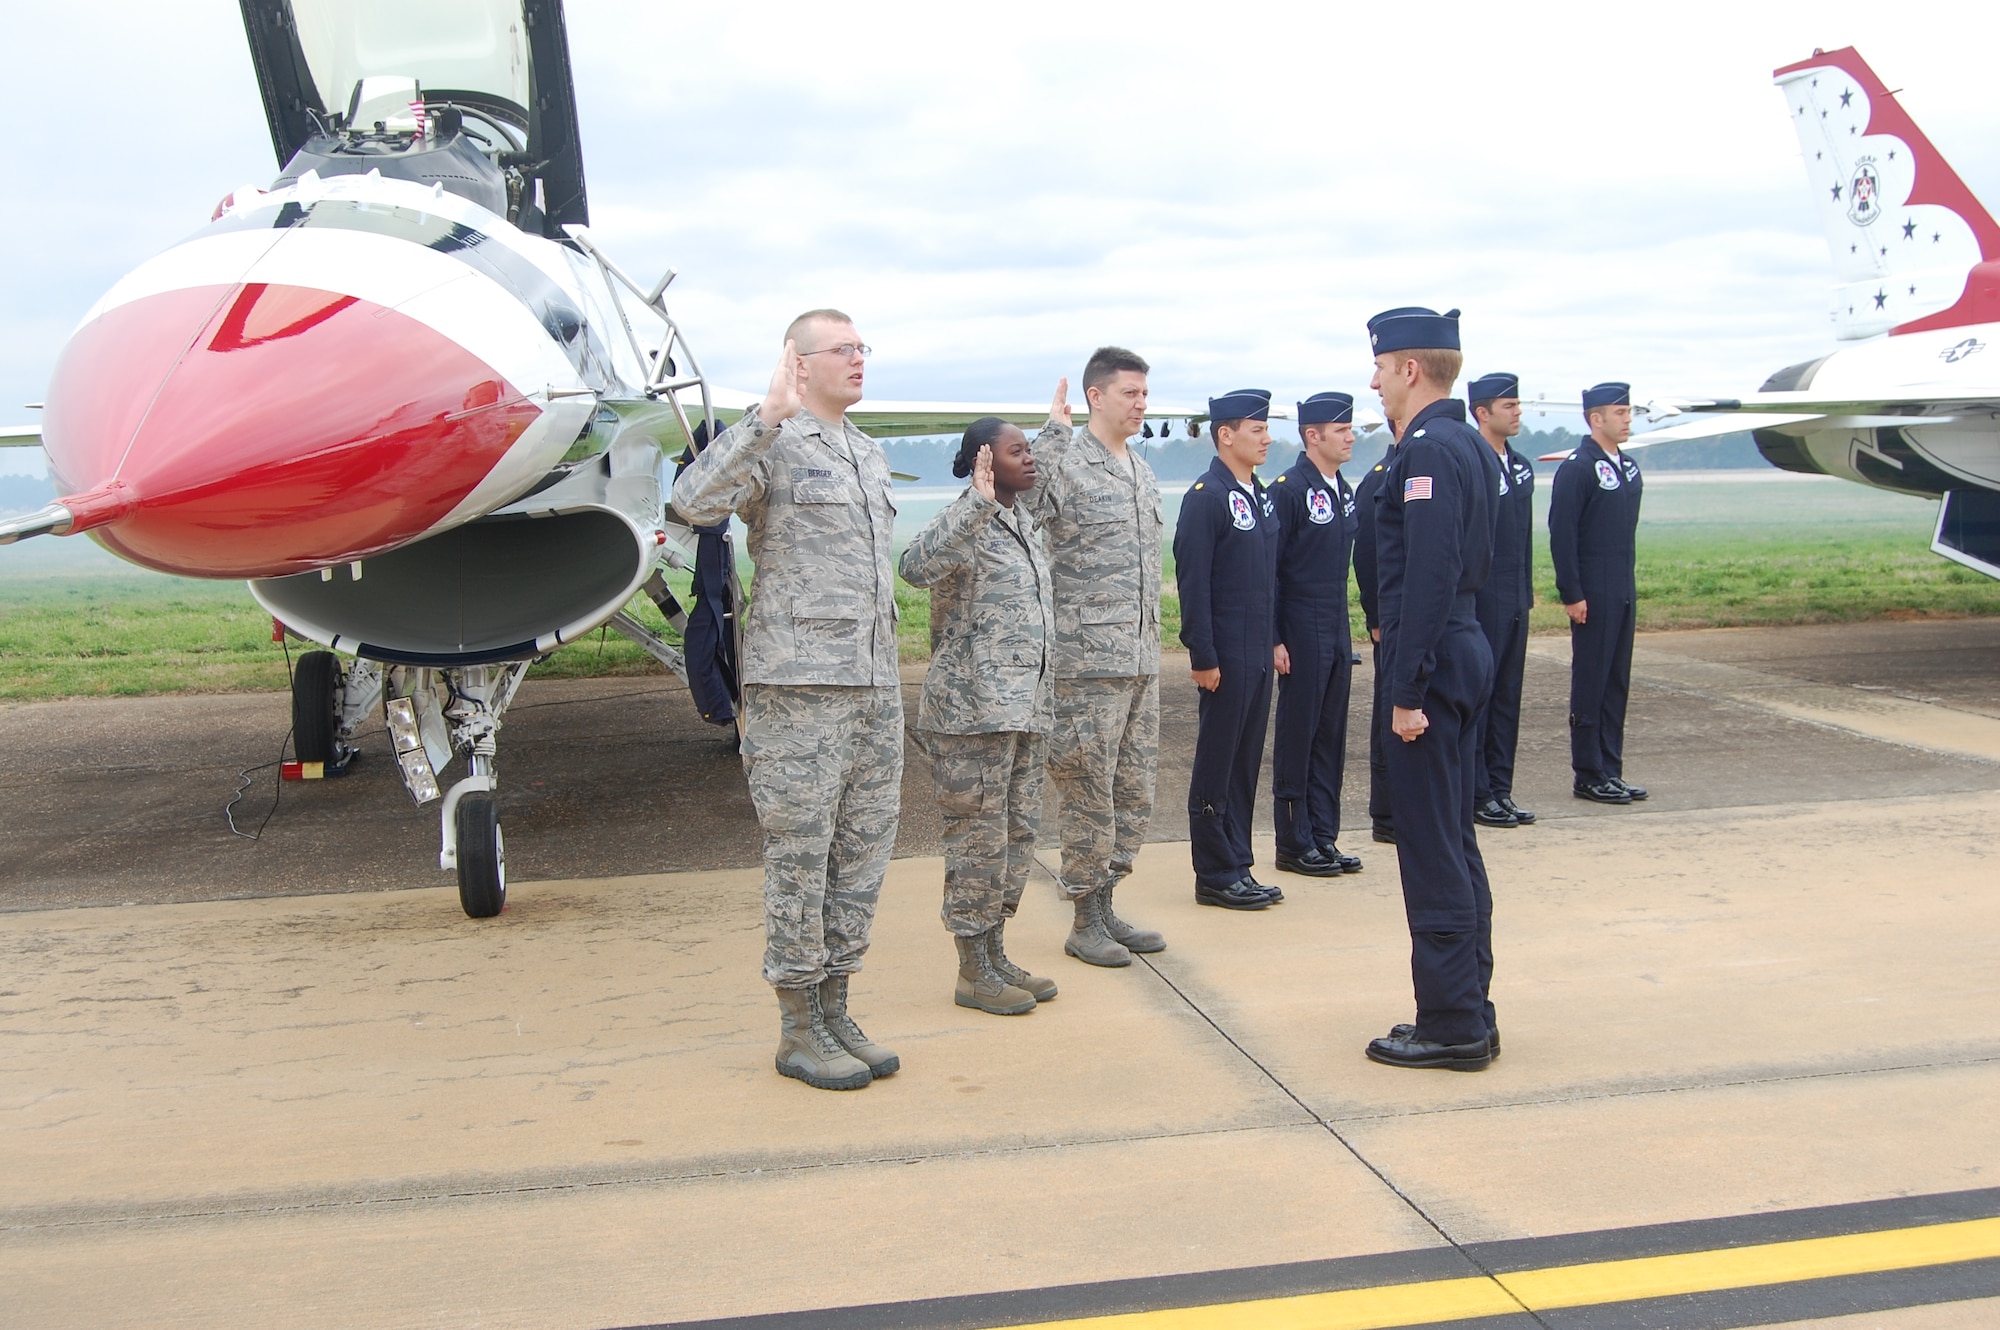 From left, Senior Airman Joseph Berger, 754th Electronic Systems Group, Staff Sgt. Kimberly Pettway, 357th Airlift Squadron and Senior Master Sgt. William Deakin, Air Force Senior NCO Academy, are re-enlisted by Thunderbird commander, Lt. Col. Case Cunningham. The ceremony took place March 26 at Maxwell Air Force Base just before the Thunderbirds flew a practice run in preparation for this weekend’s open house and air show. (Air Force Photo by Carl Bergquist)